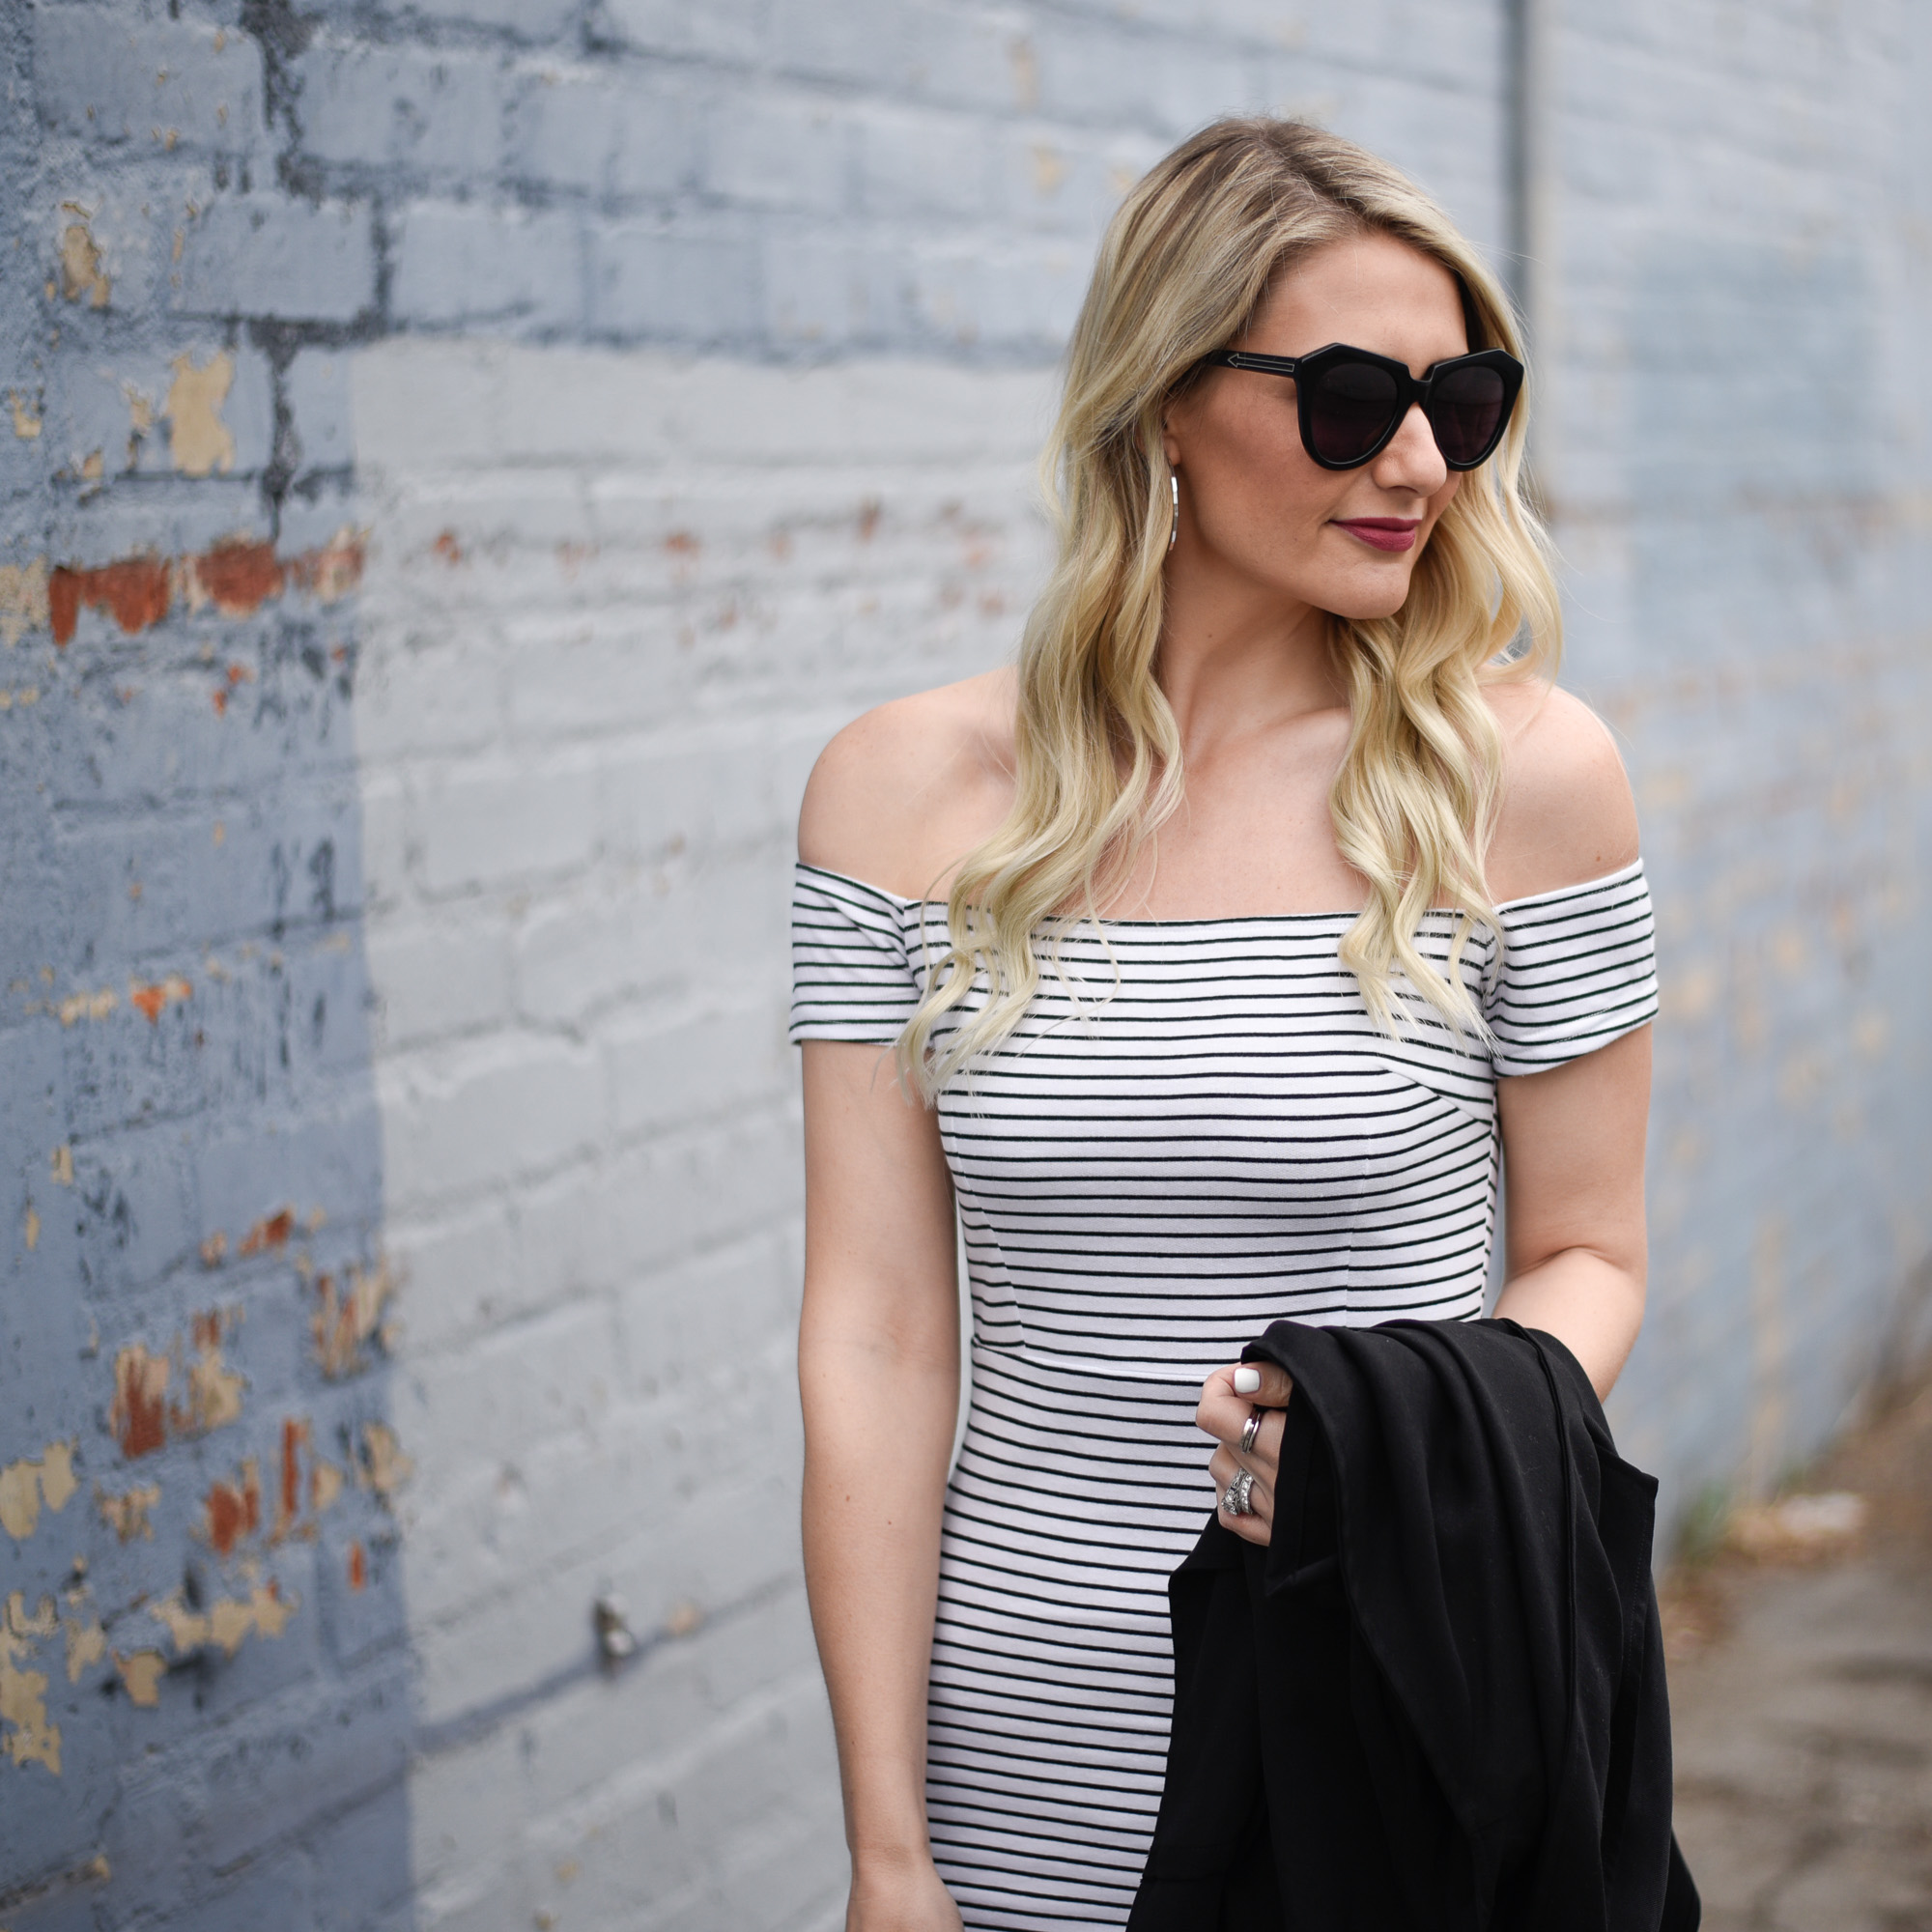 Off the shoulder bodycon dress in white and black stripes. 